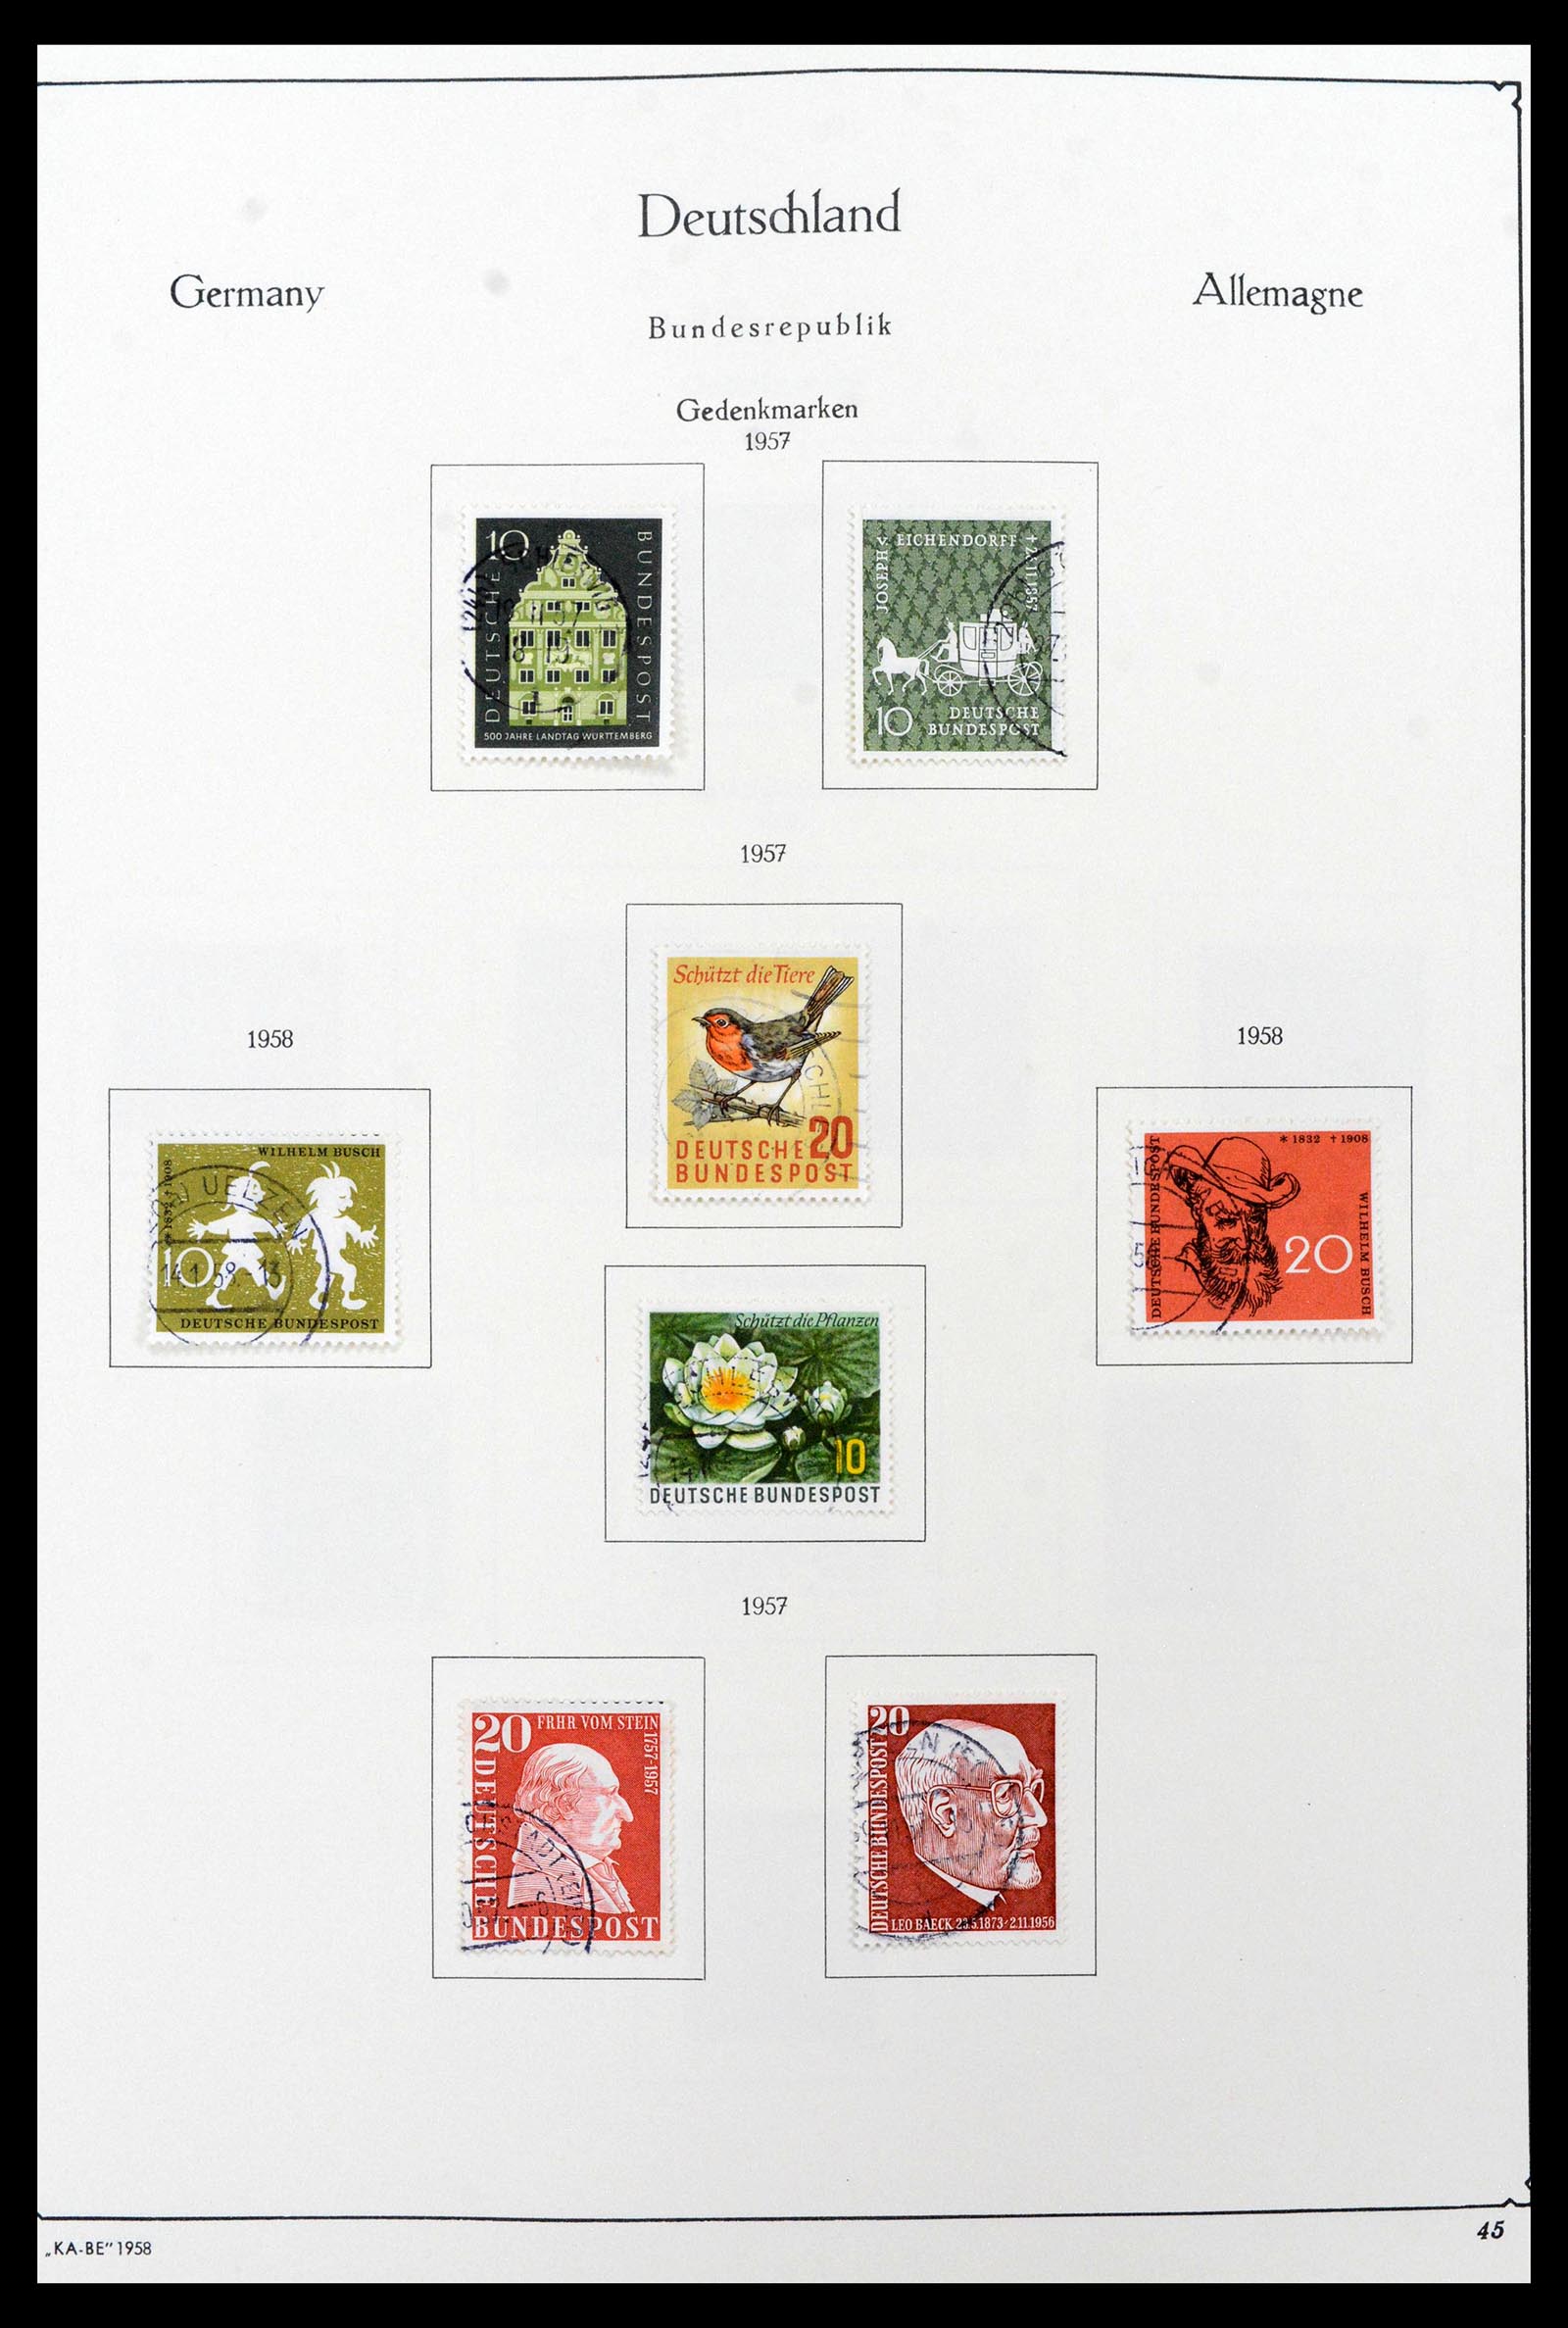 39148 0017 - Stamp collection 39148 Bundespost 1949-1987.